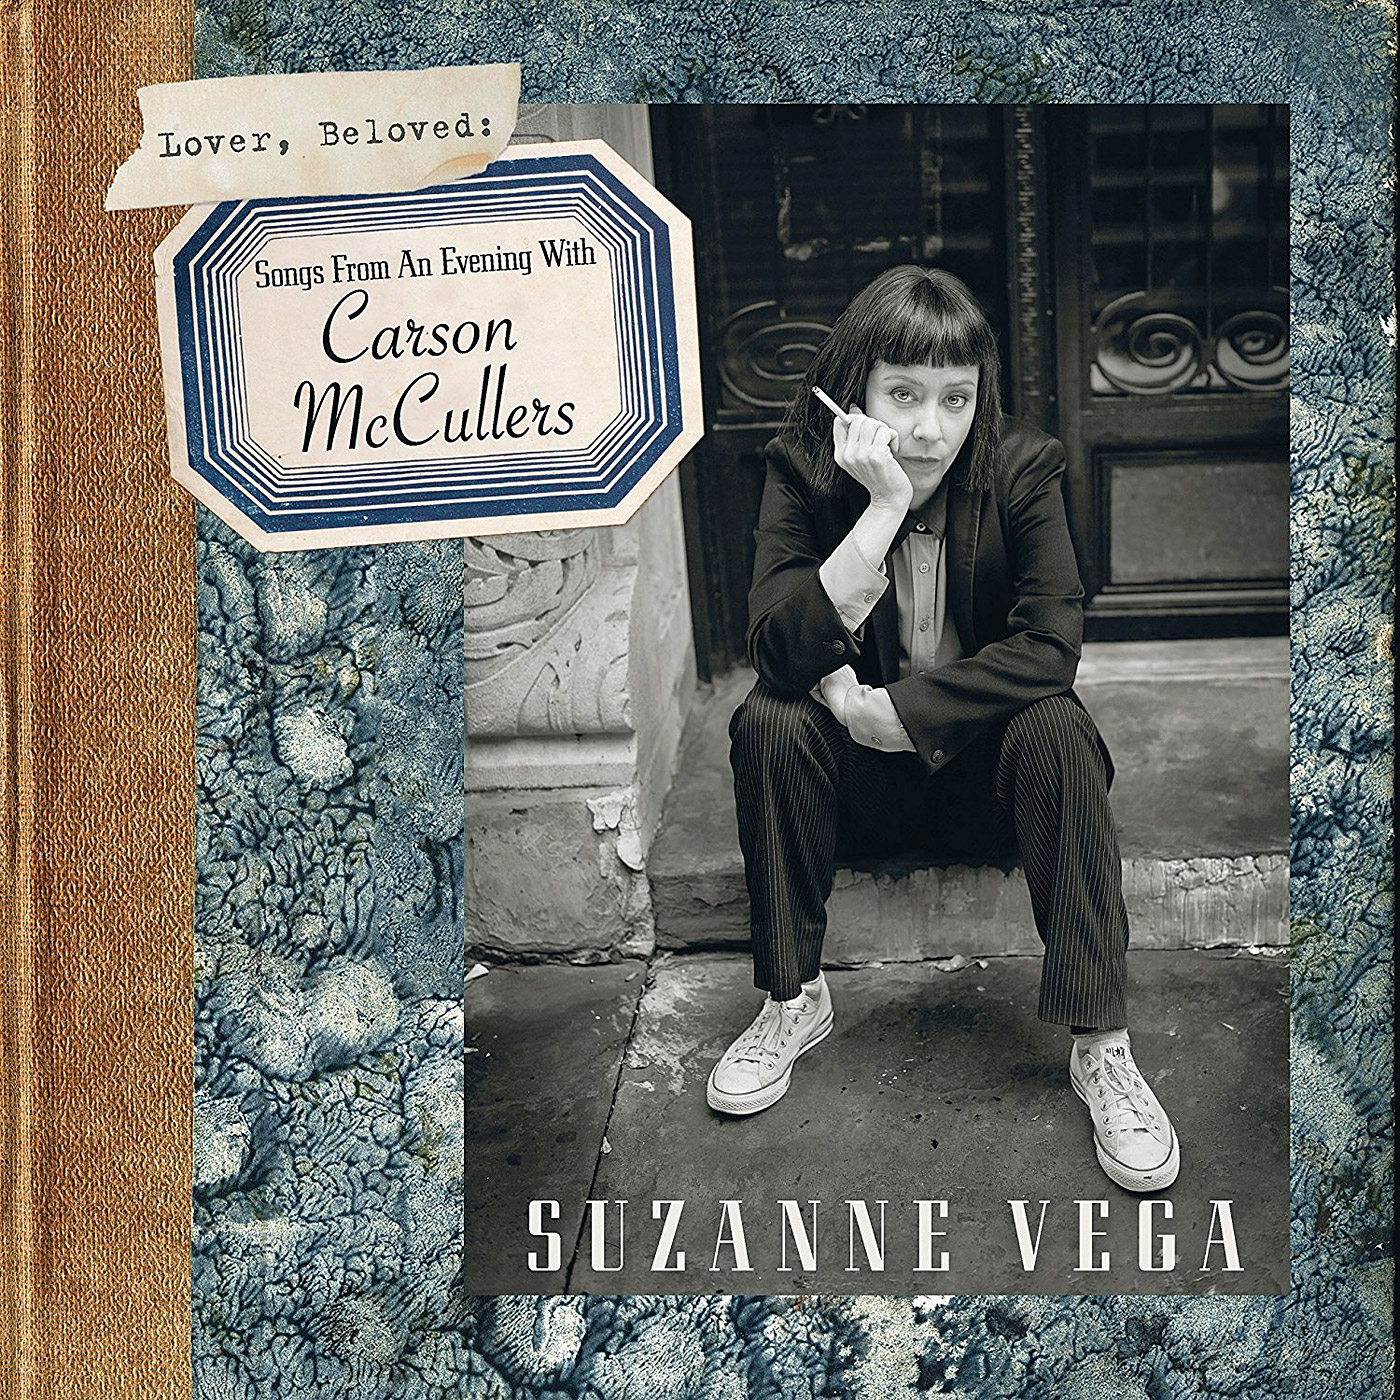 Suzanne Vega - Lover, Beloved: Songs From An Evening With Carson Mccullers (2016) [Qobuz FLAC 24bit/44,1kHz]